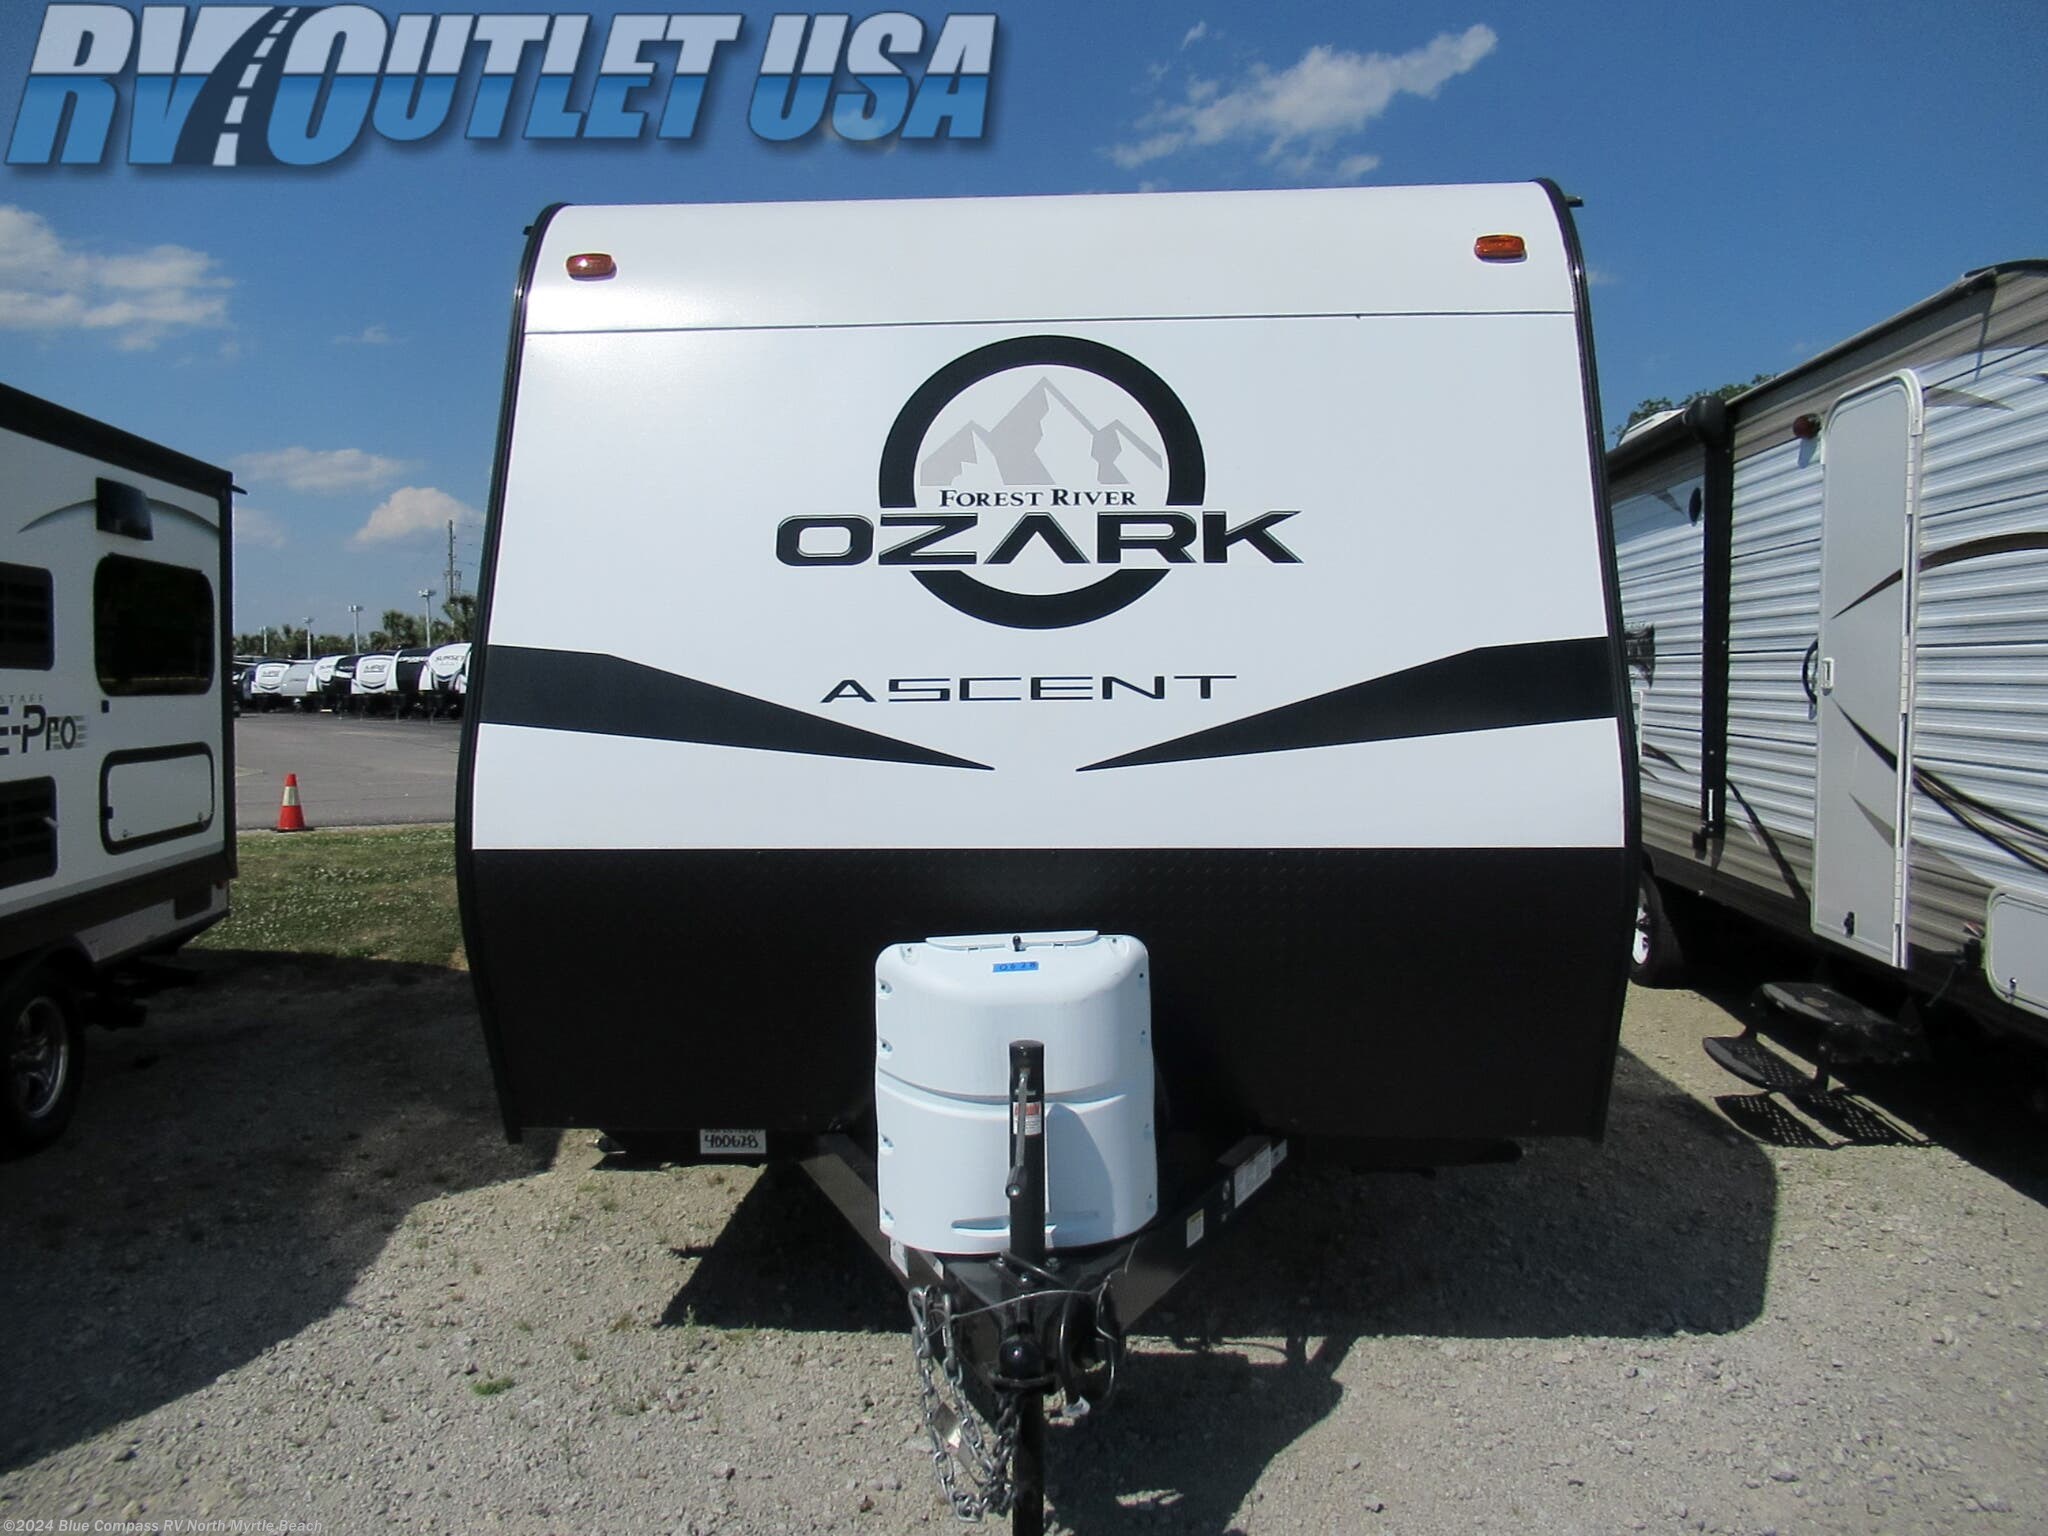 2021 Forest River Ozark 1650BHX RV for Sale in Longs, SC 29568 | SCWW2175B | RVUSA.com Classifieds 2021 Forest River Ozark 1650bhx For Sale